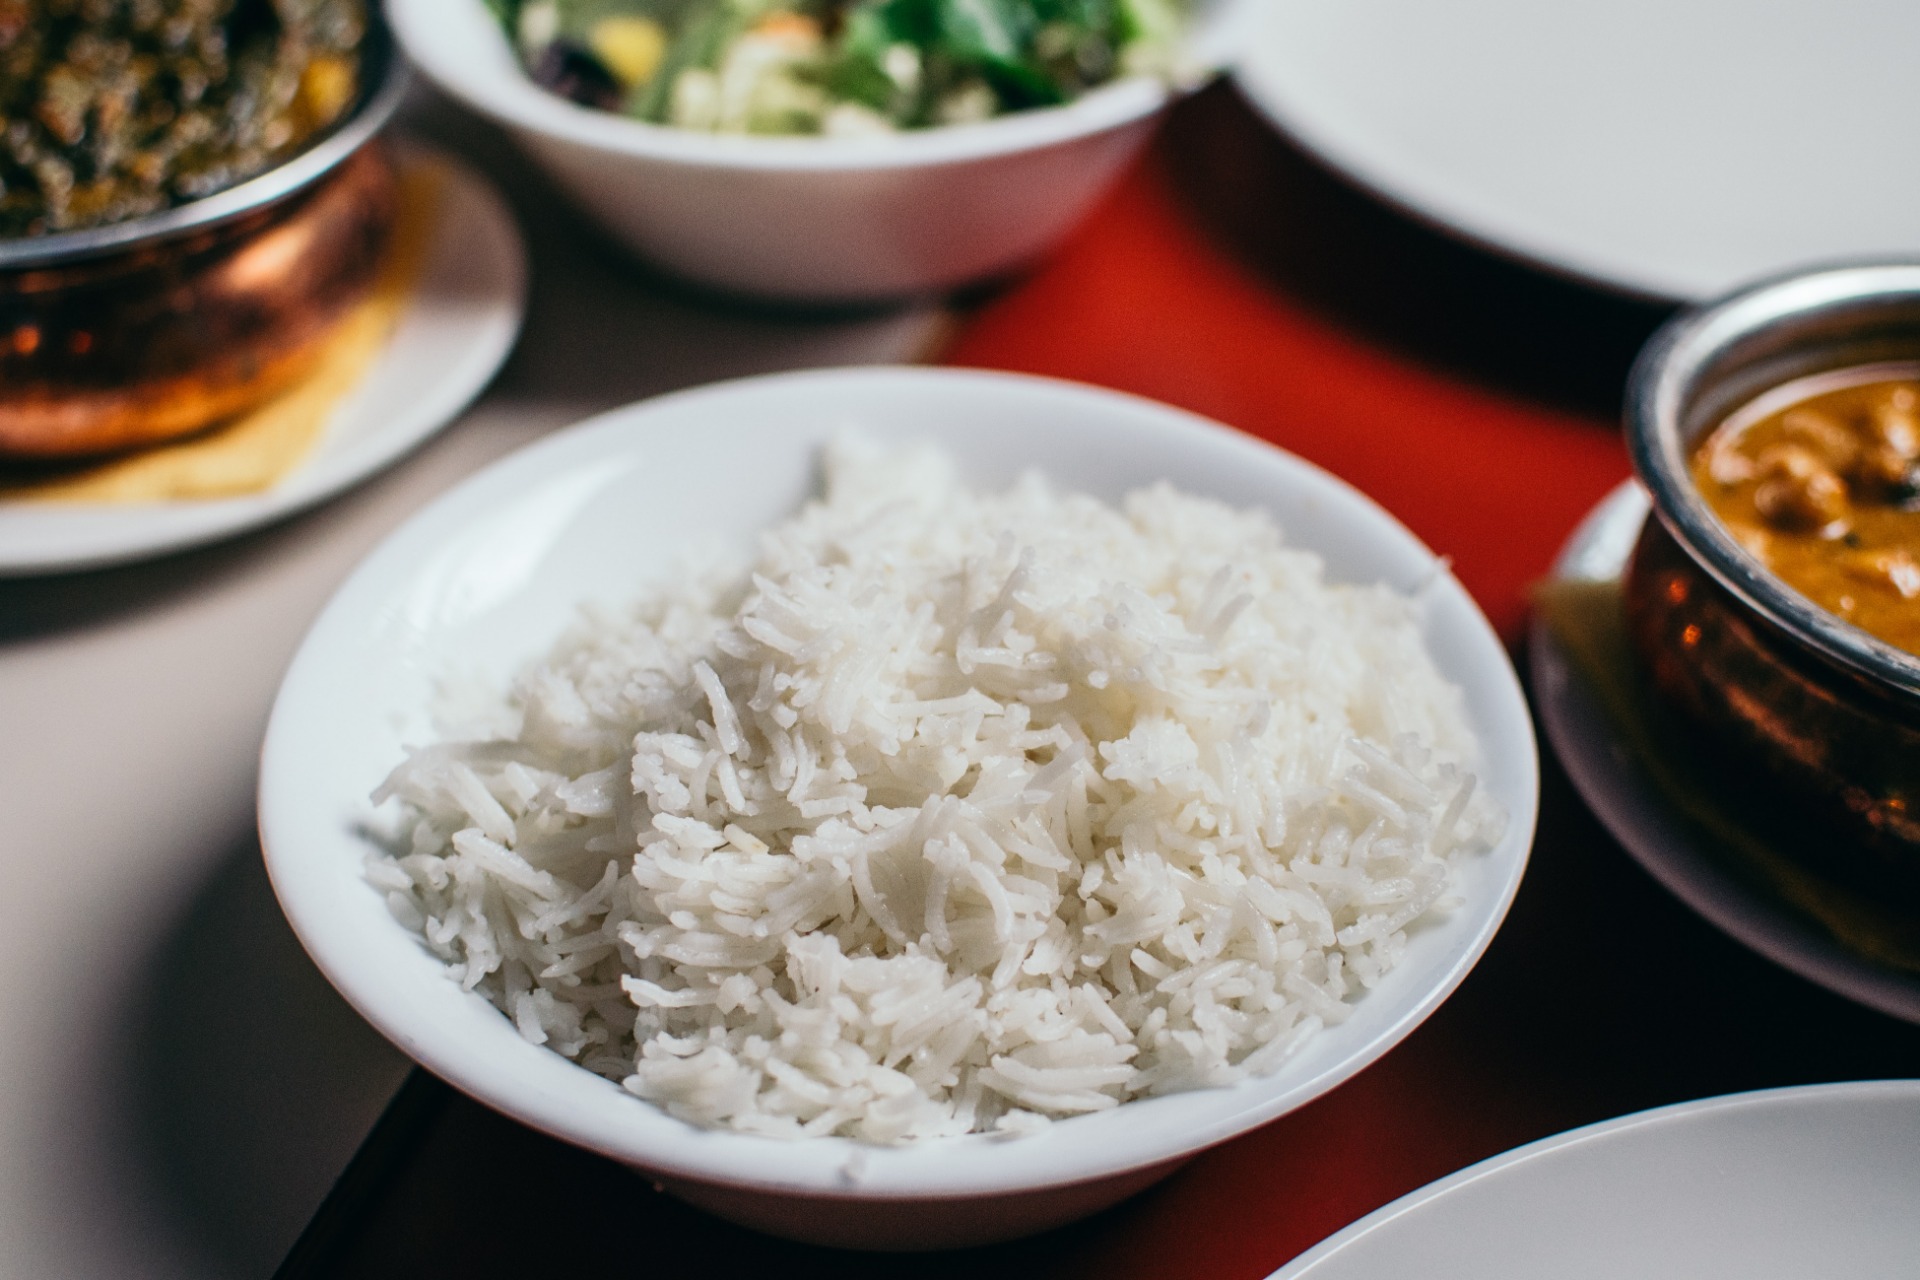 Bowl of cooked white rice which has lectins but after refrigerating, eating the following day, is a healthy resistant starch